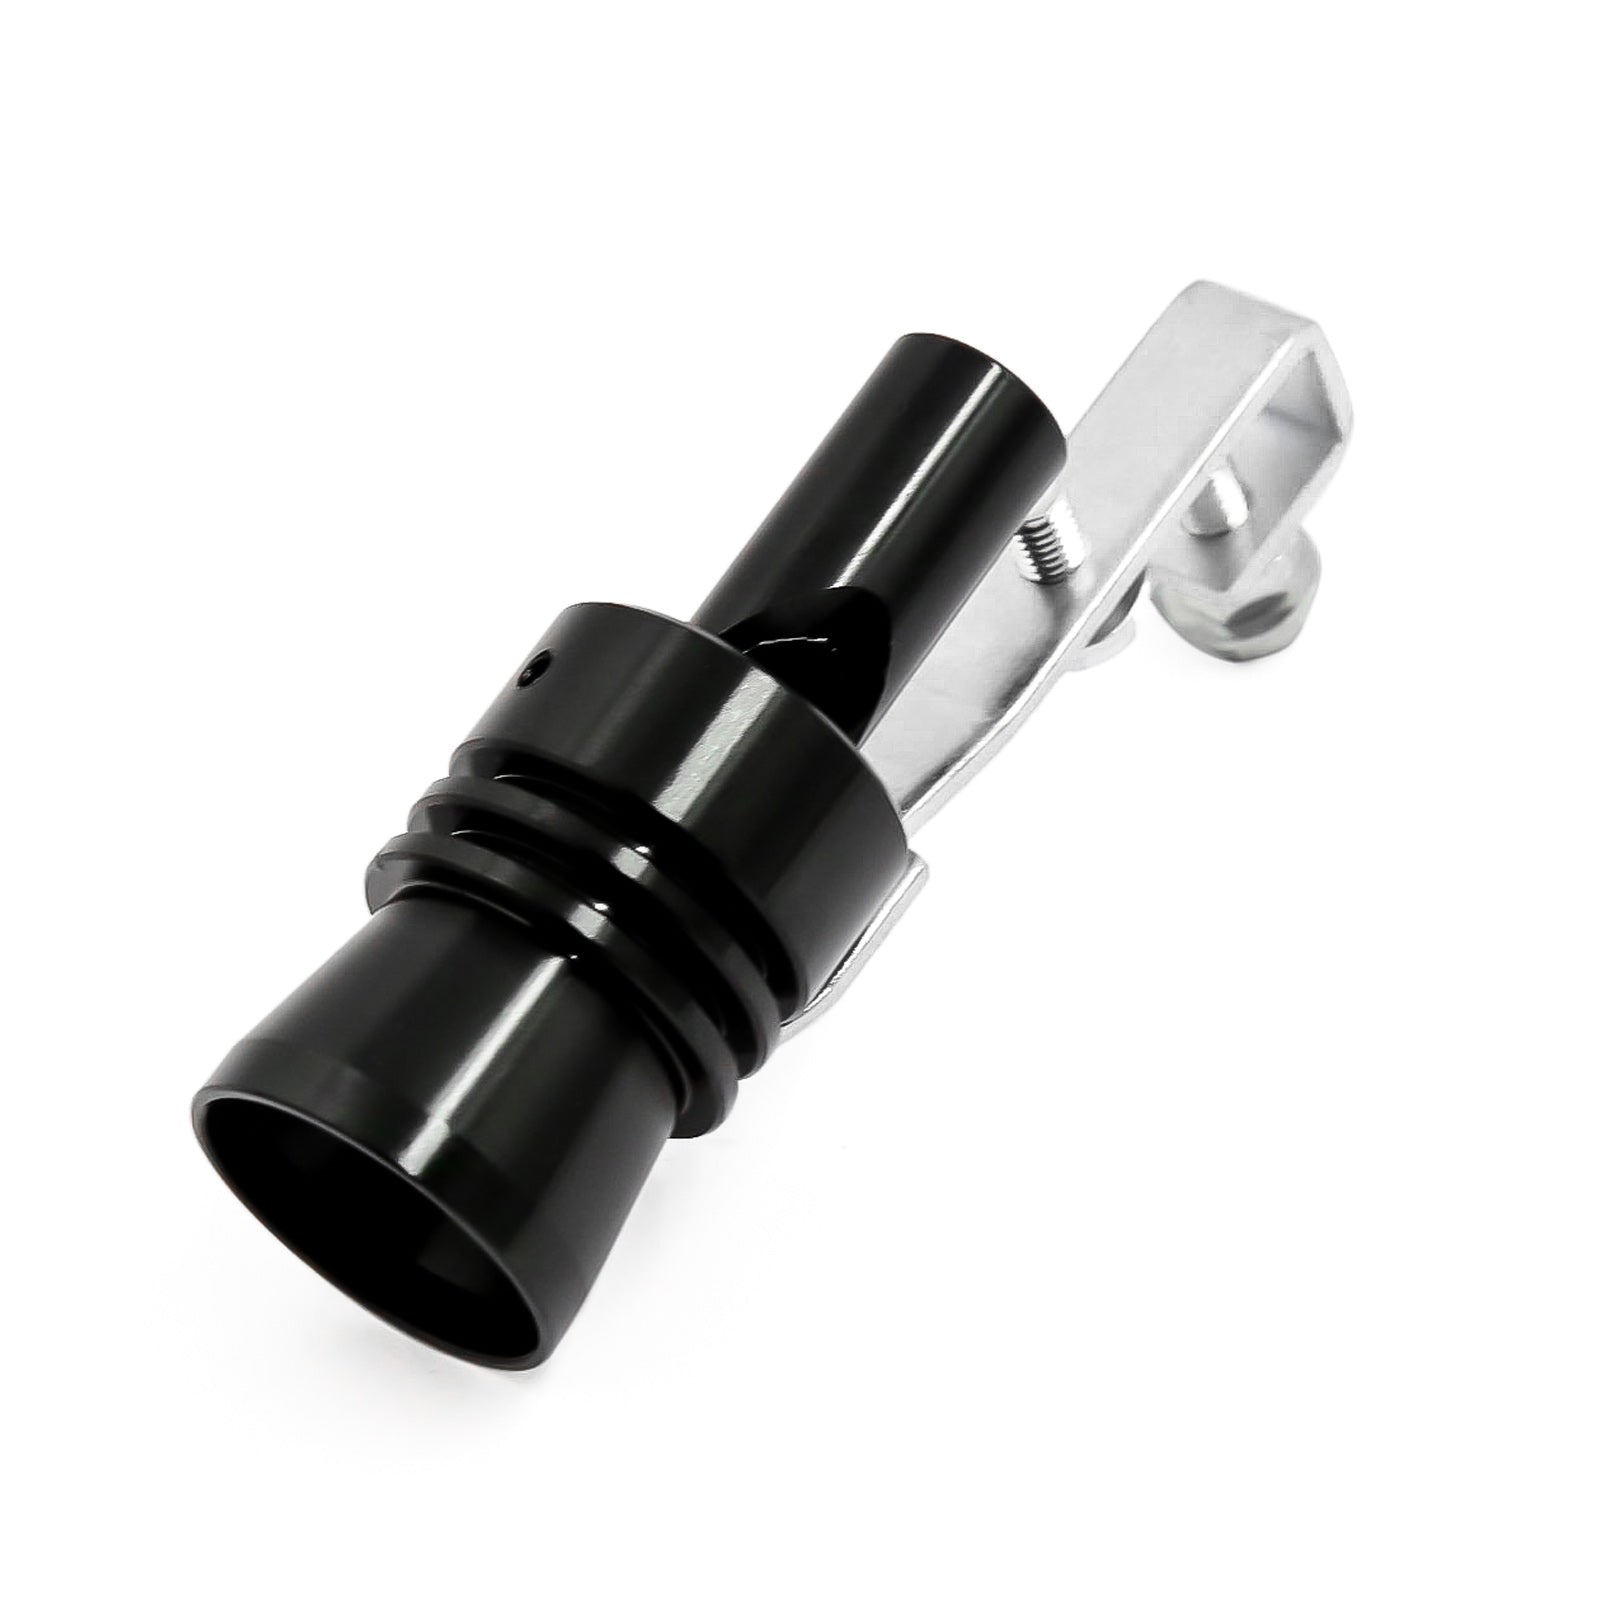 Turbo Sound Whistle Exhaust Tailpipe Blow-off Valve Aluminum Size XL Black  